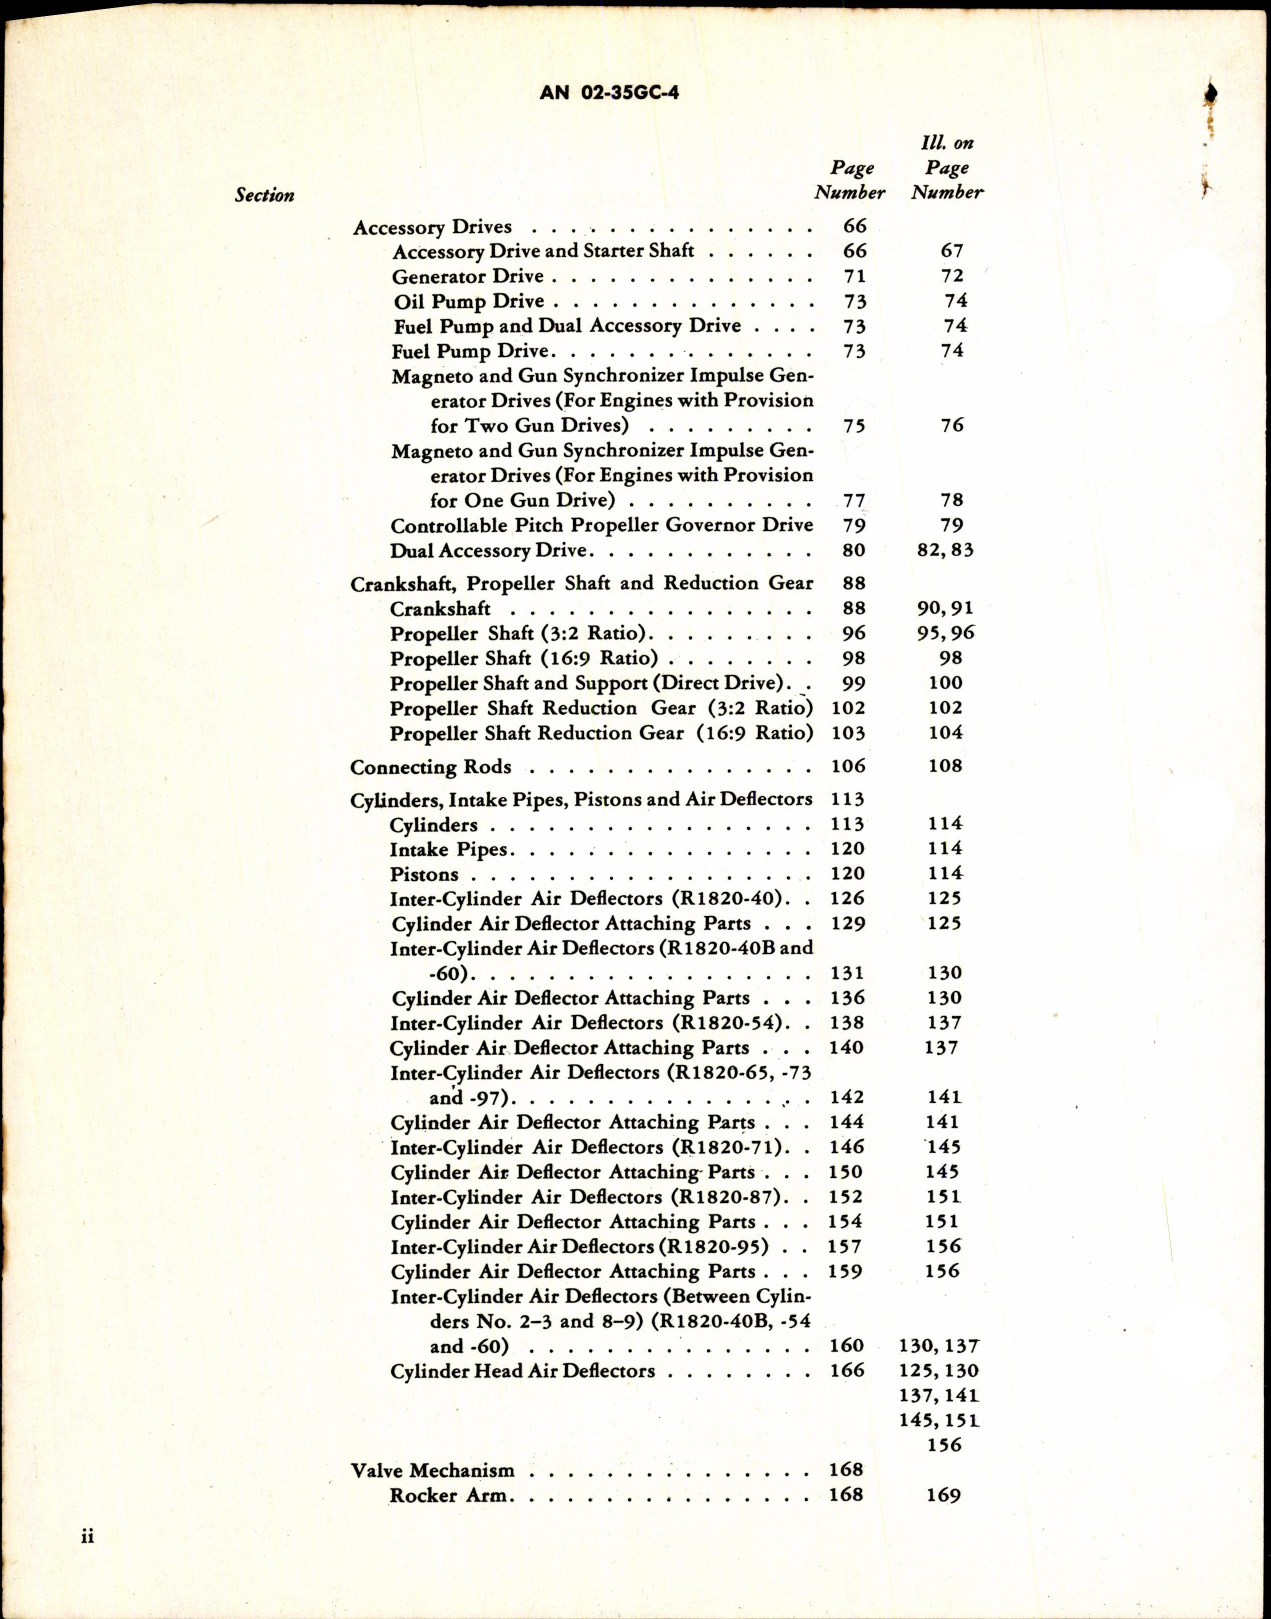 Sample page 4 from AirCorps Library document: Parts Catalog for Aircraft Engines Models R-1820 